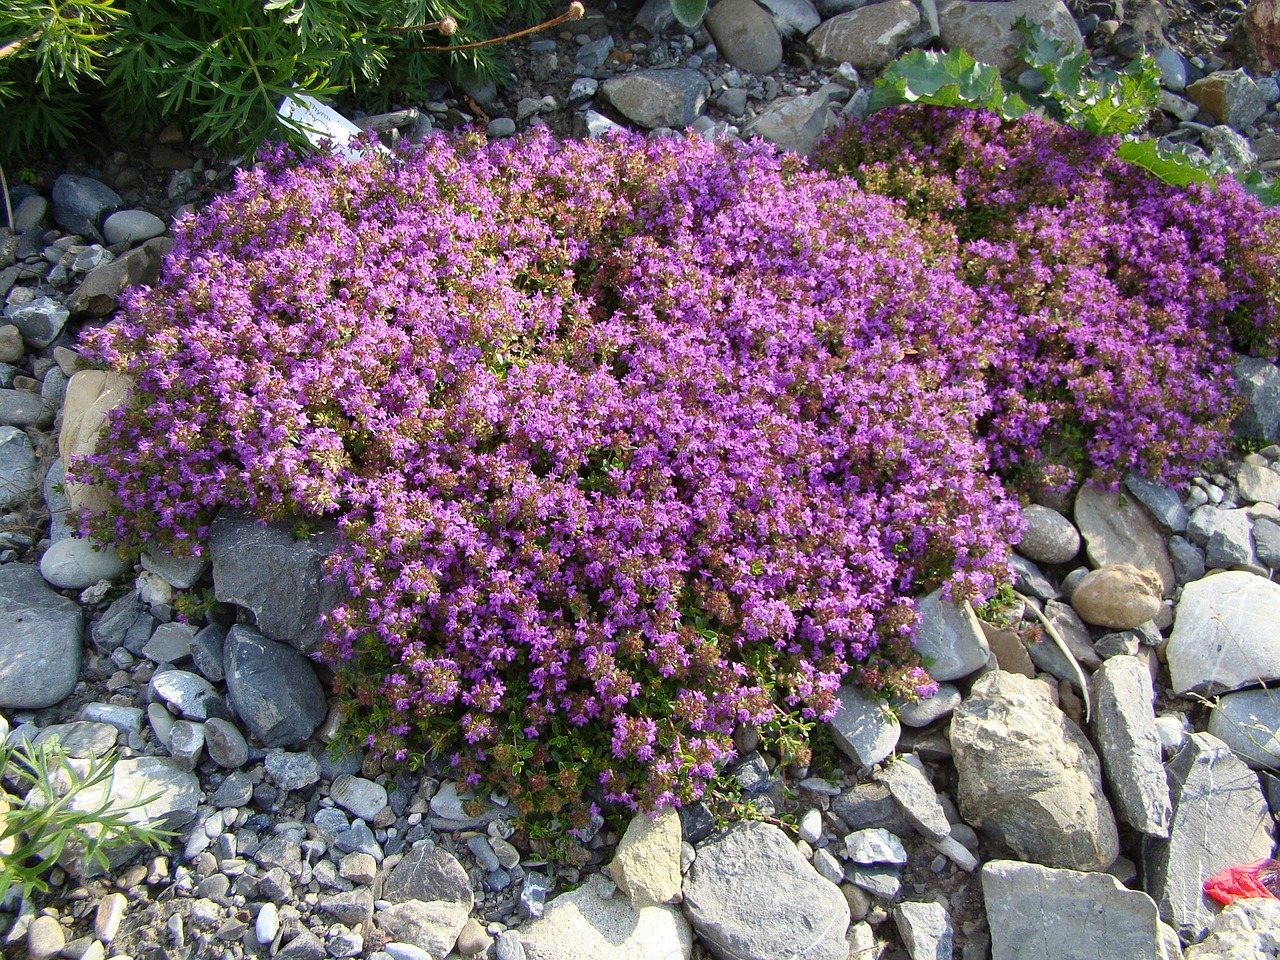 8 Ground Cover Plants for your Gardening and Landscaping - Plants Spark Joy